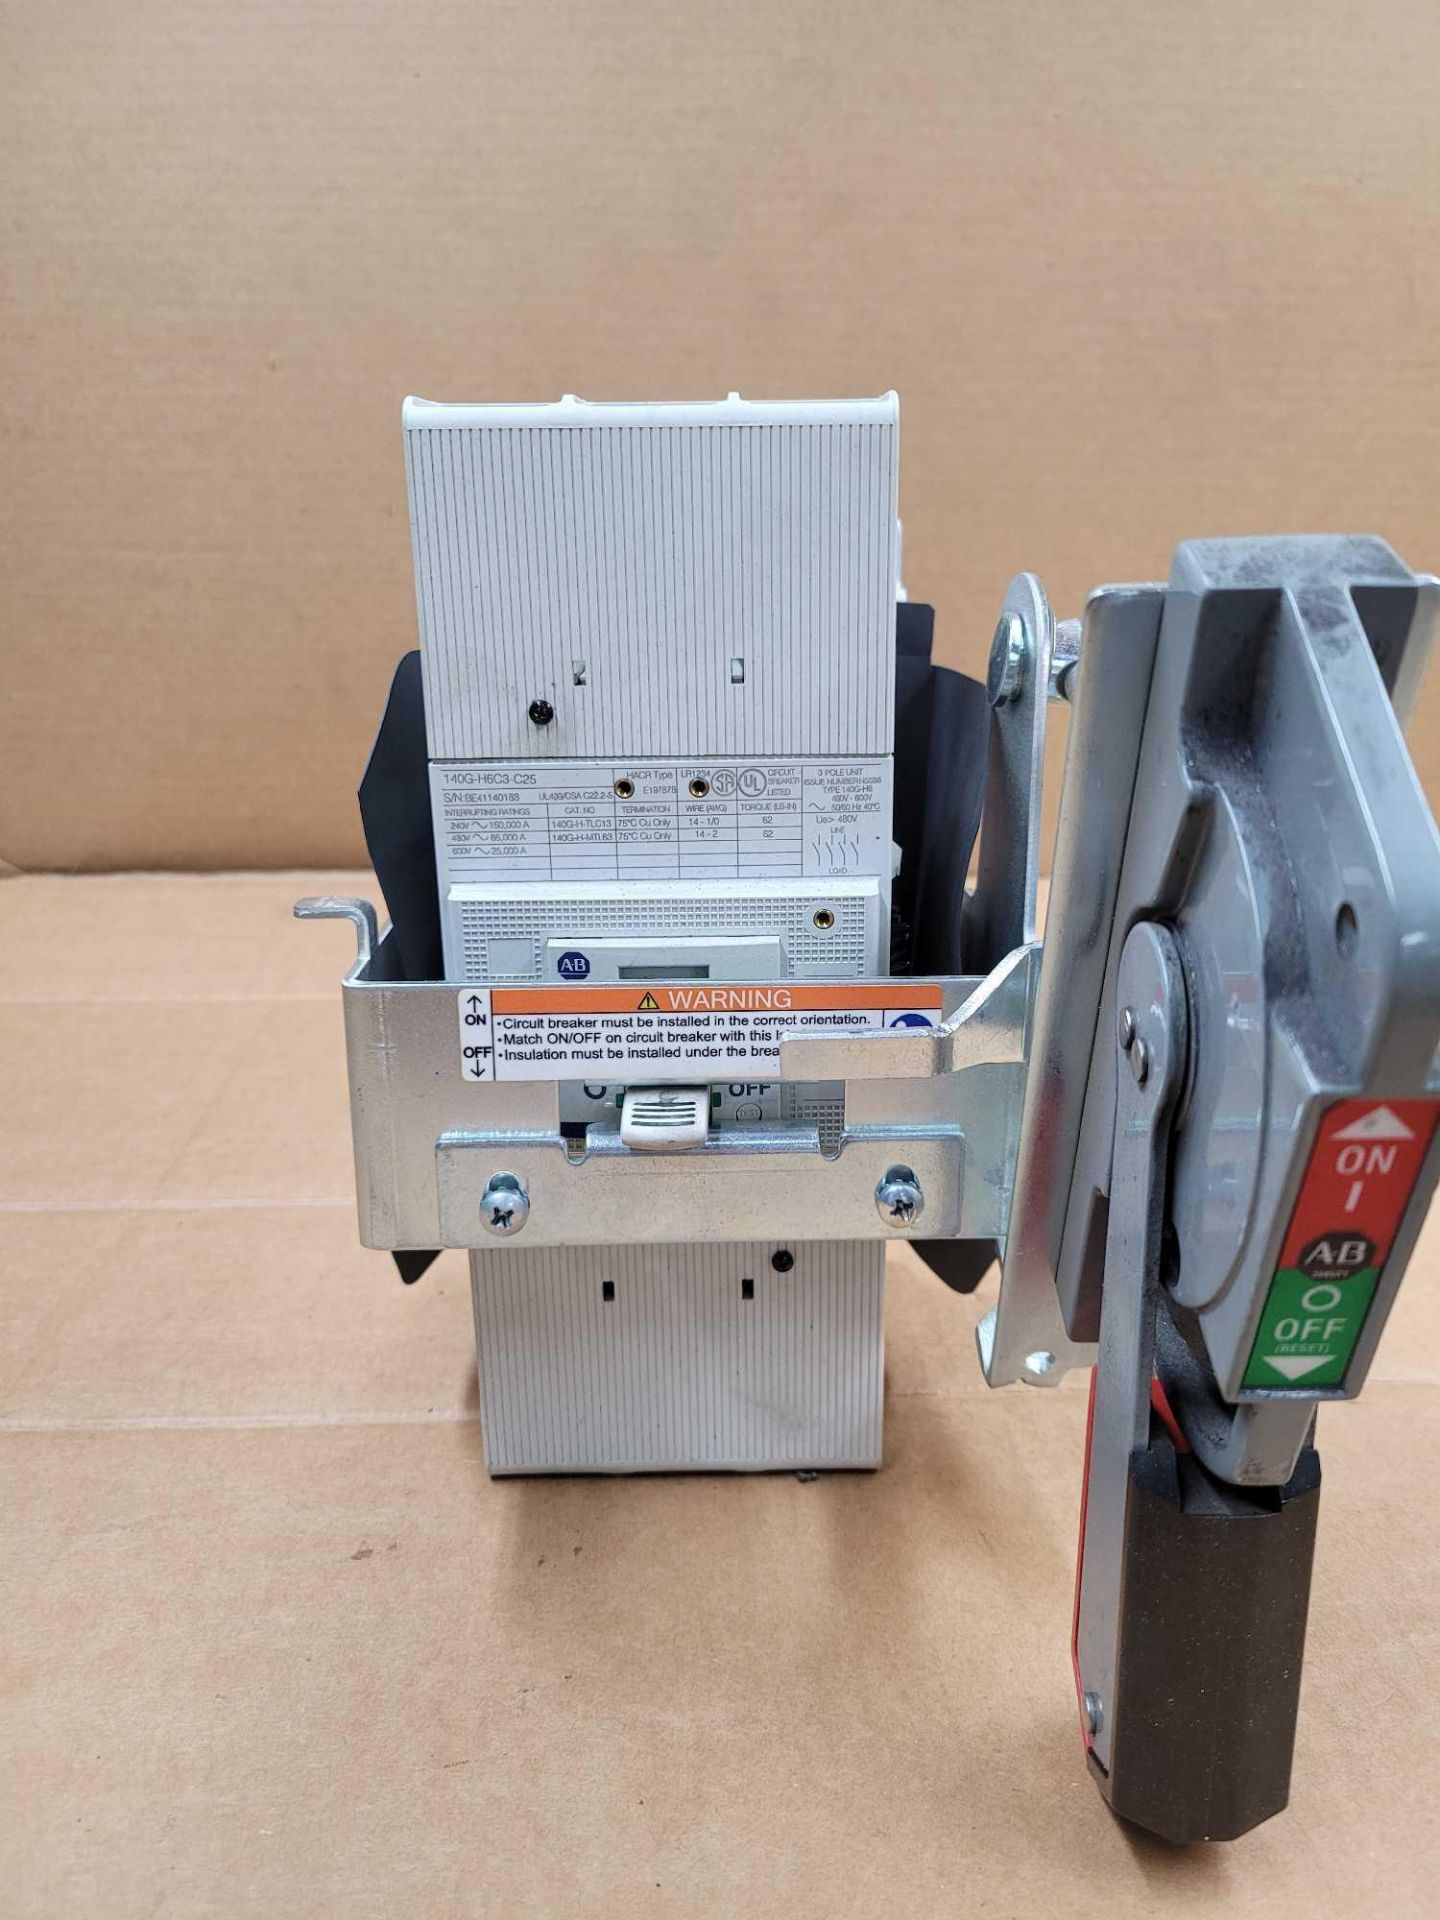 LOT OF 2 ALLEN BRADLEY 140G-H6C3-C25-FB / Series A 25 Amp Circuit Breaker with Operating Mechanism - Image 3 of 10